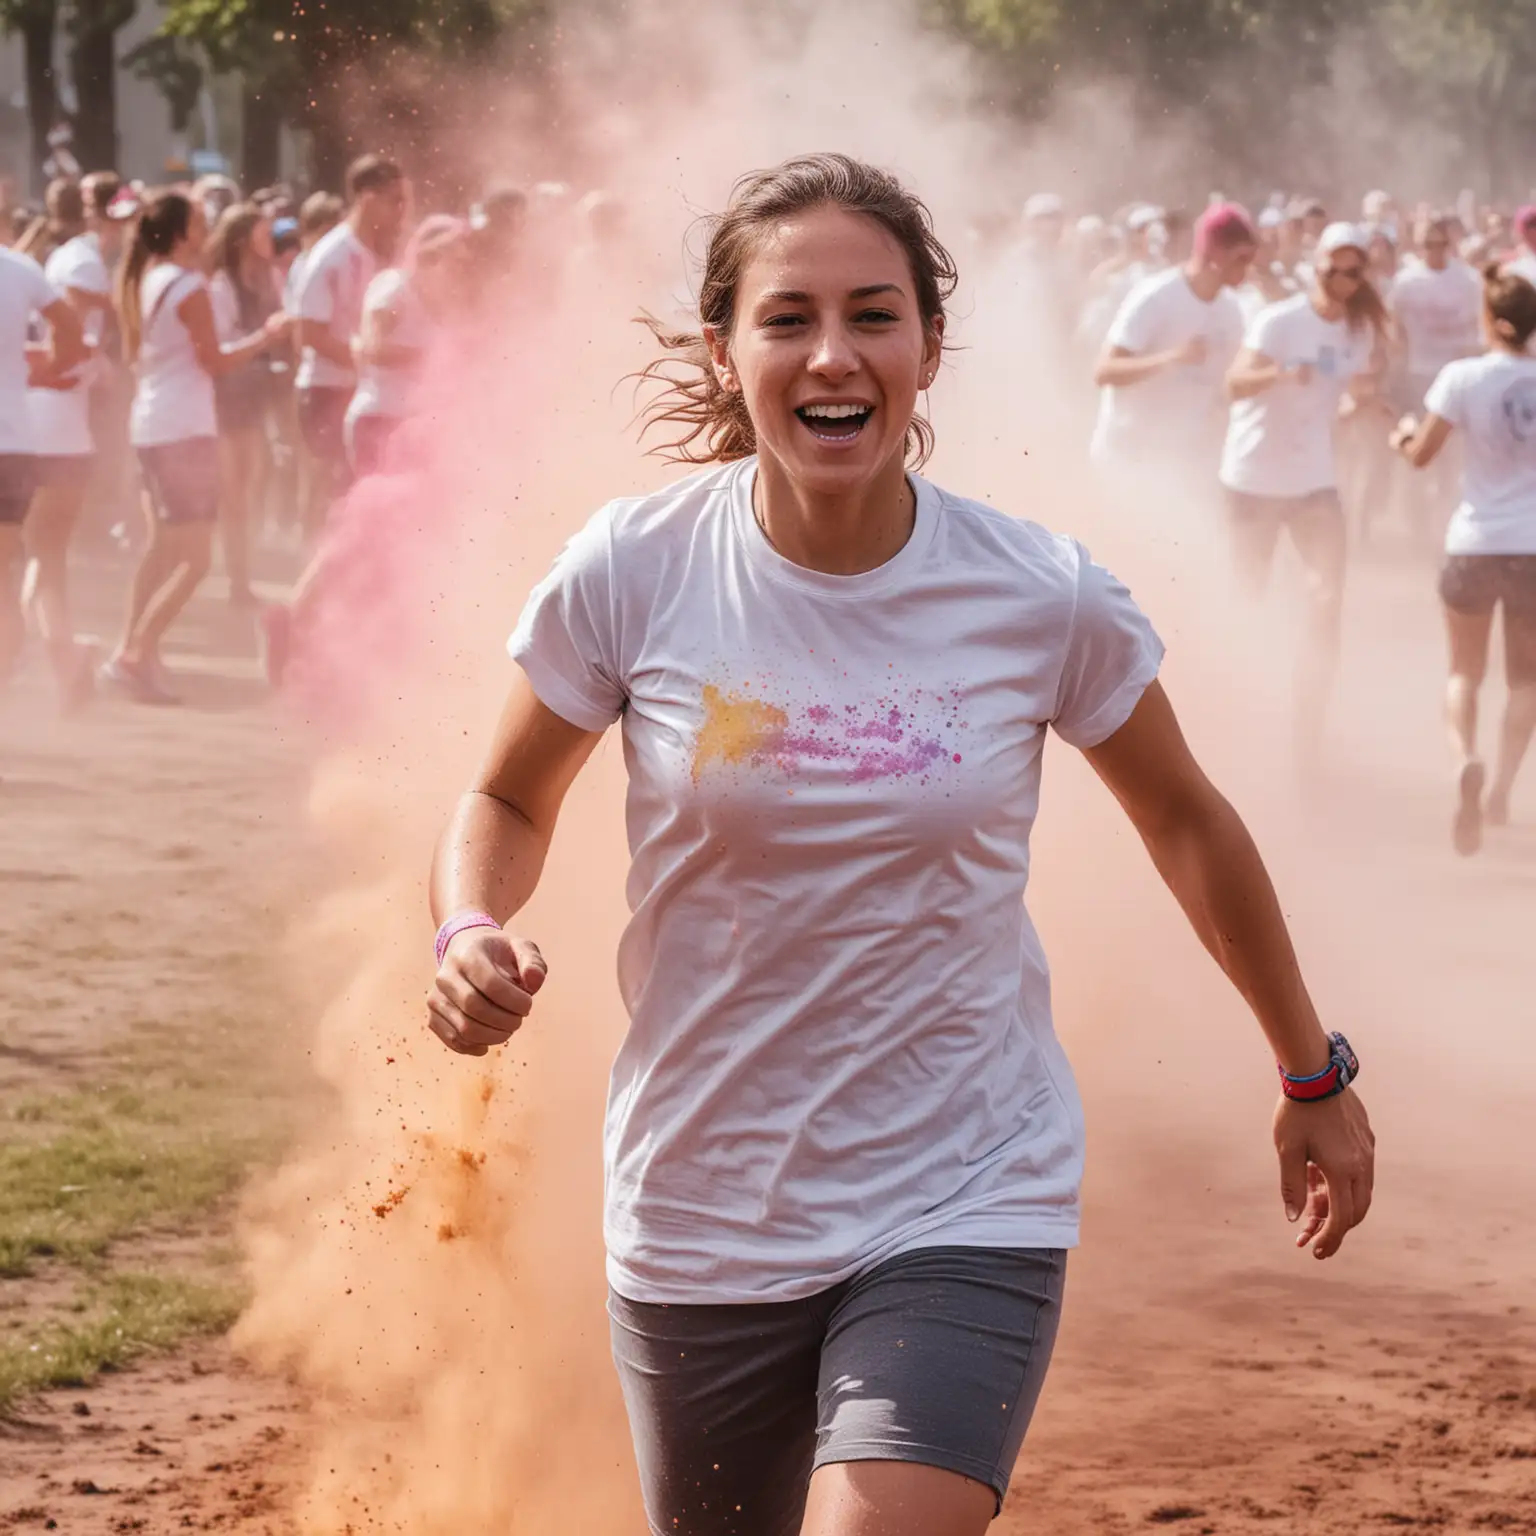 person in all white t-shirt running and getting hit by colored powder in colour run zoom up to t-shirt
